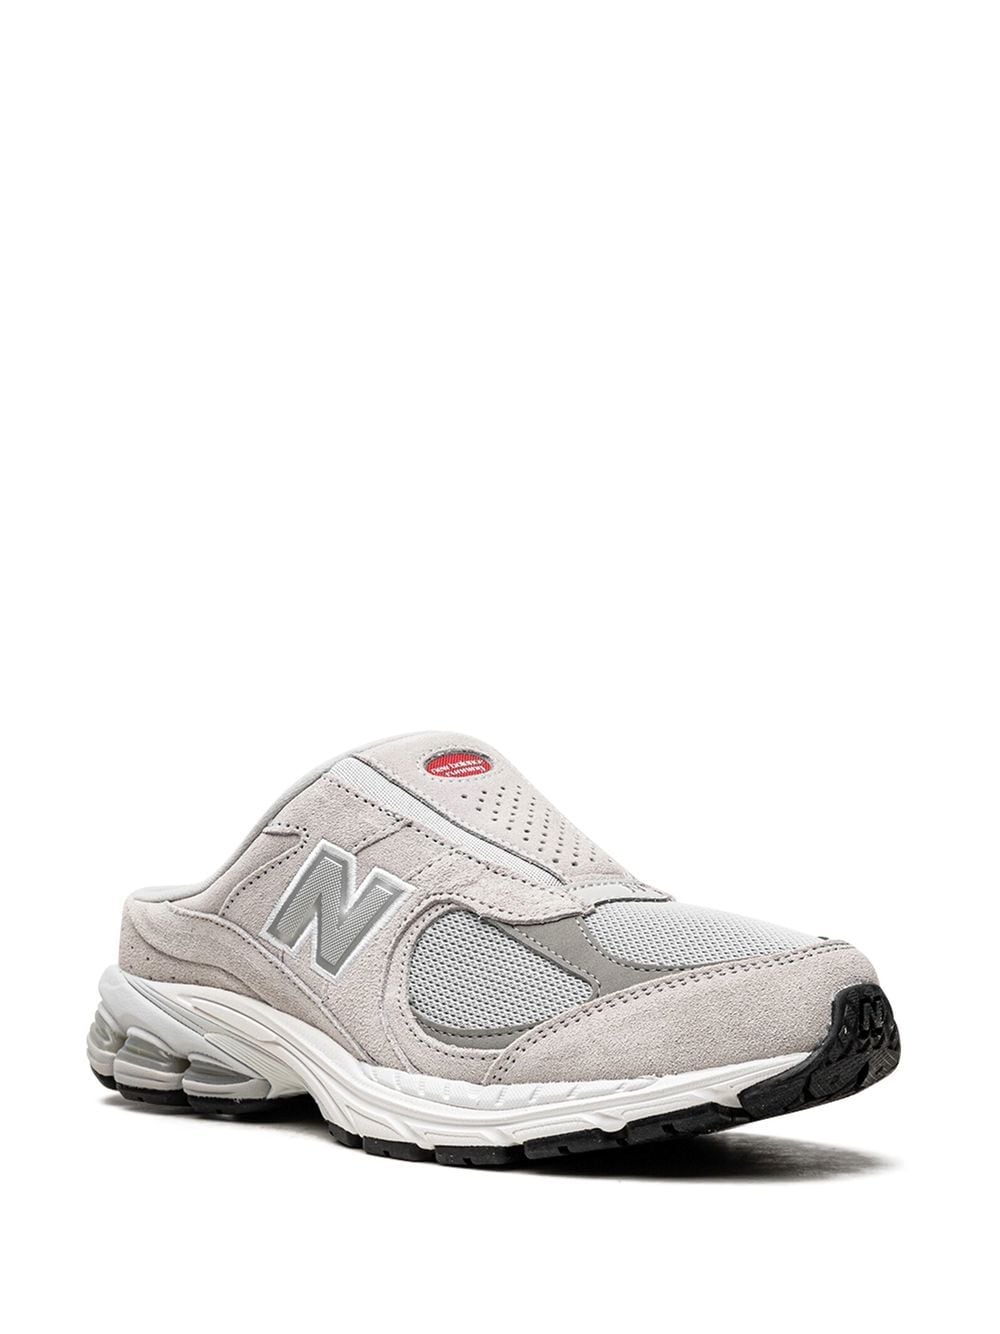 Image 2 of New Balance 2002R "Grey" sneaker mules